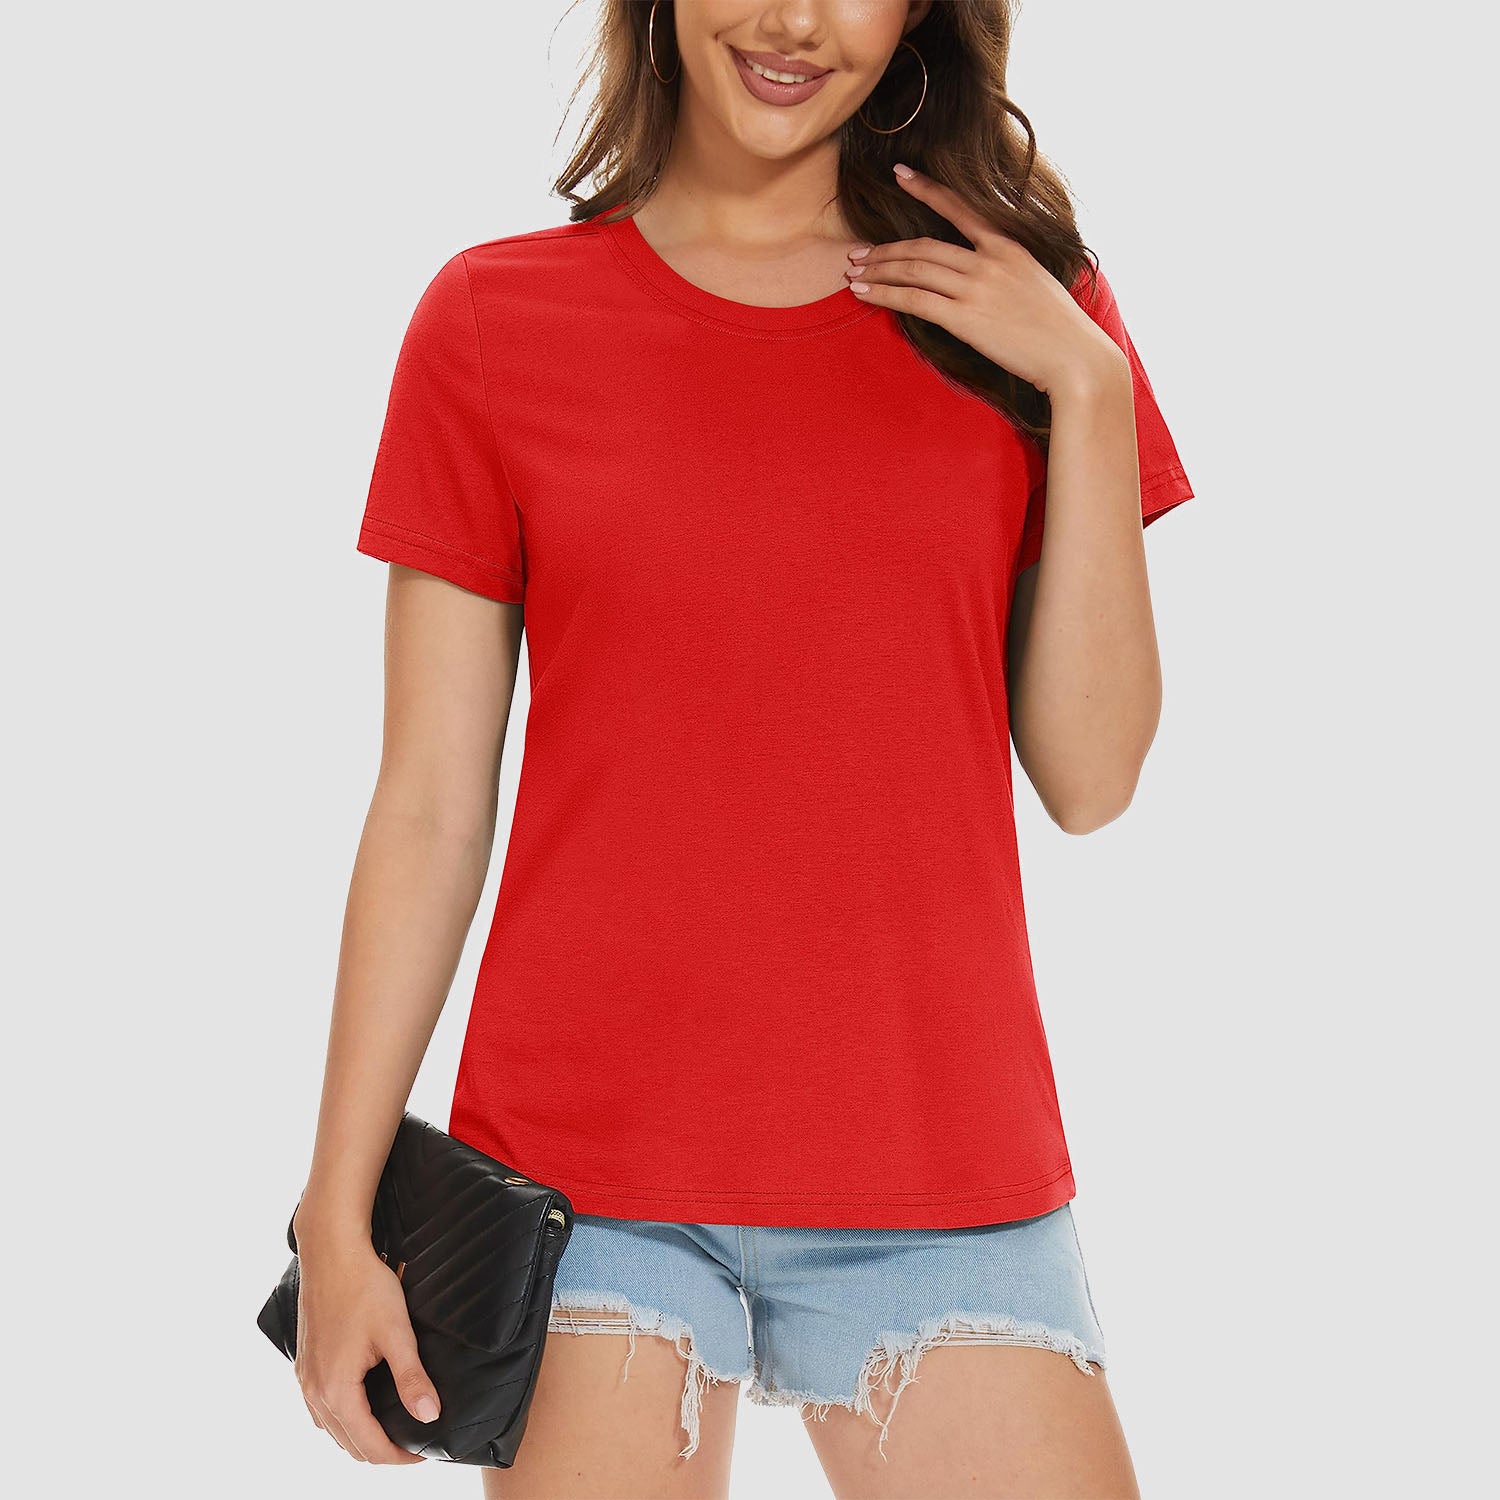 Womens Cotton Crewneck T Shirts Short Sleeve Breathable Basic Tee for Women Summer Casual Tops